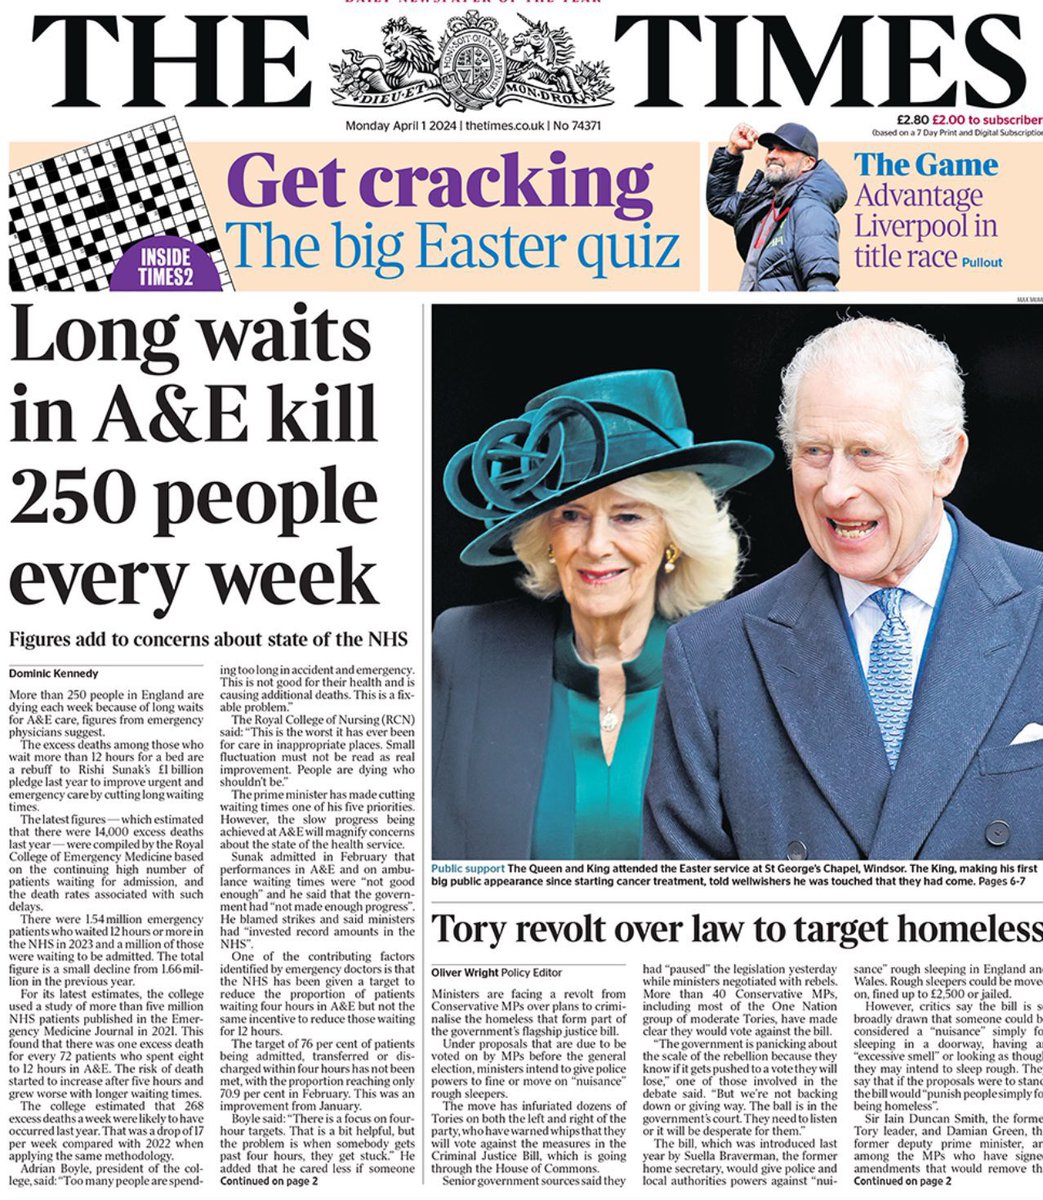 Rishi Sunak, January 2023: 'We're either delivering for you or we're not... so judge us... on the results that we achieve.' The Times, 1st April 2024: 'Over 250 A&E patients die each week due to long NHS waiting times.'